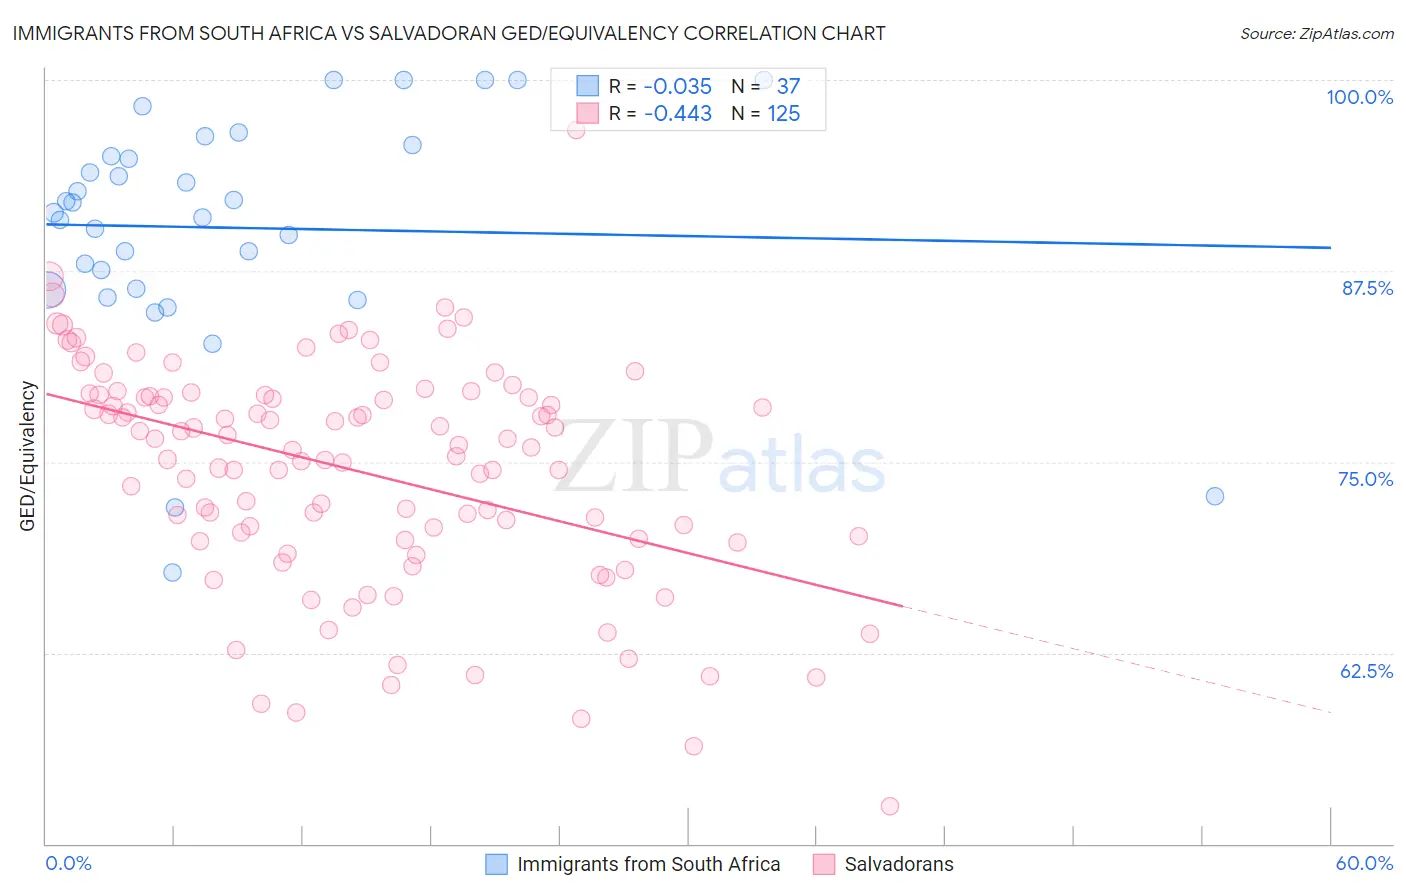 Immigrants from South Africa vs Salvadoran GED/Equivalency